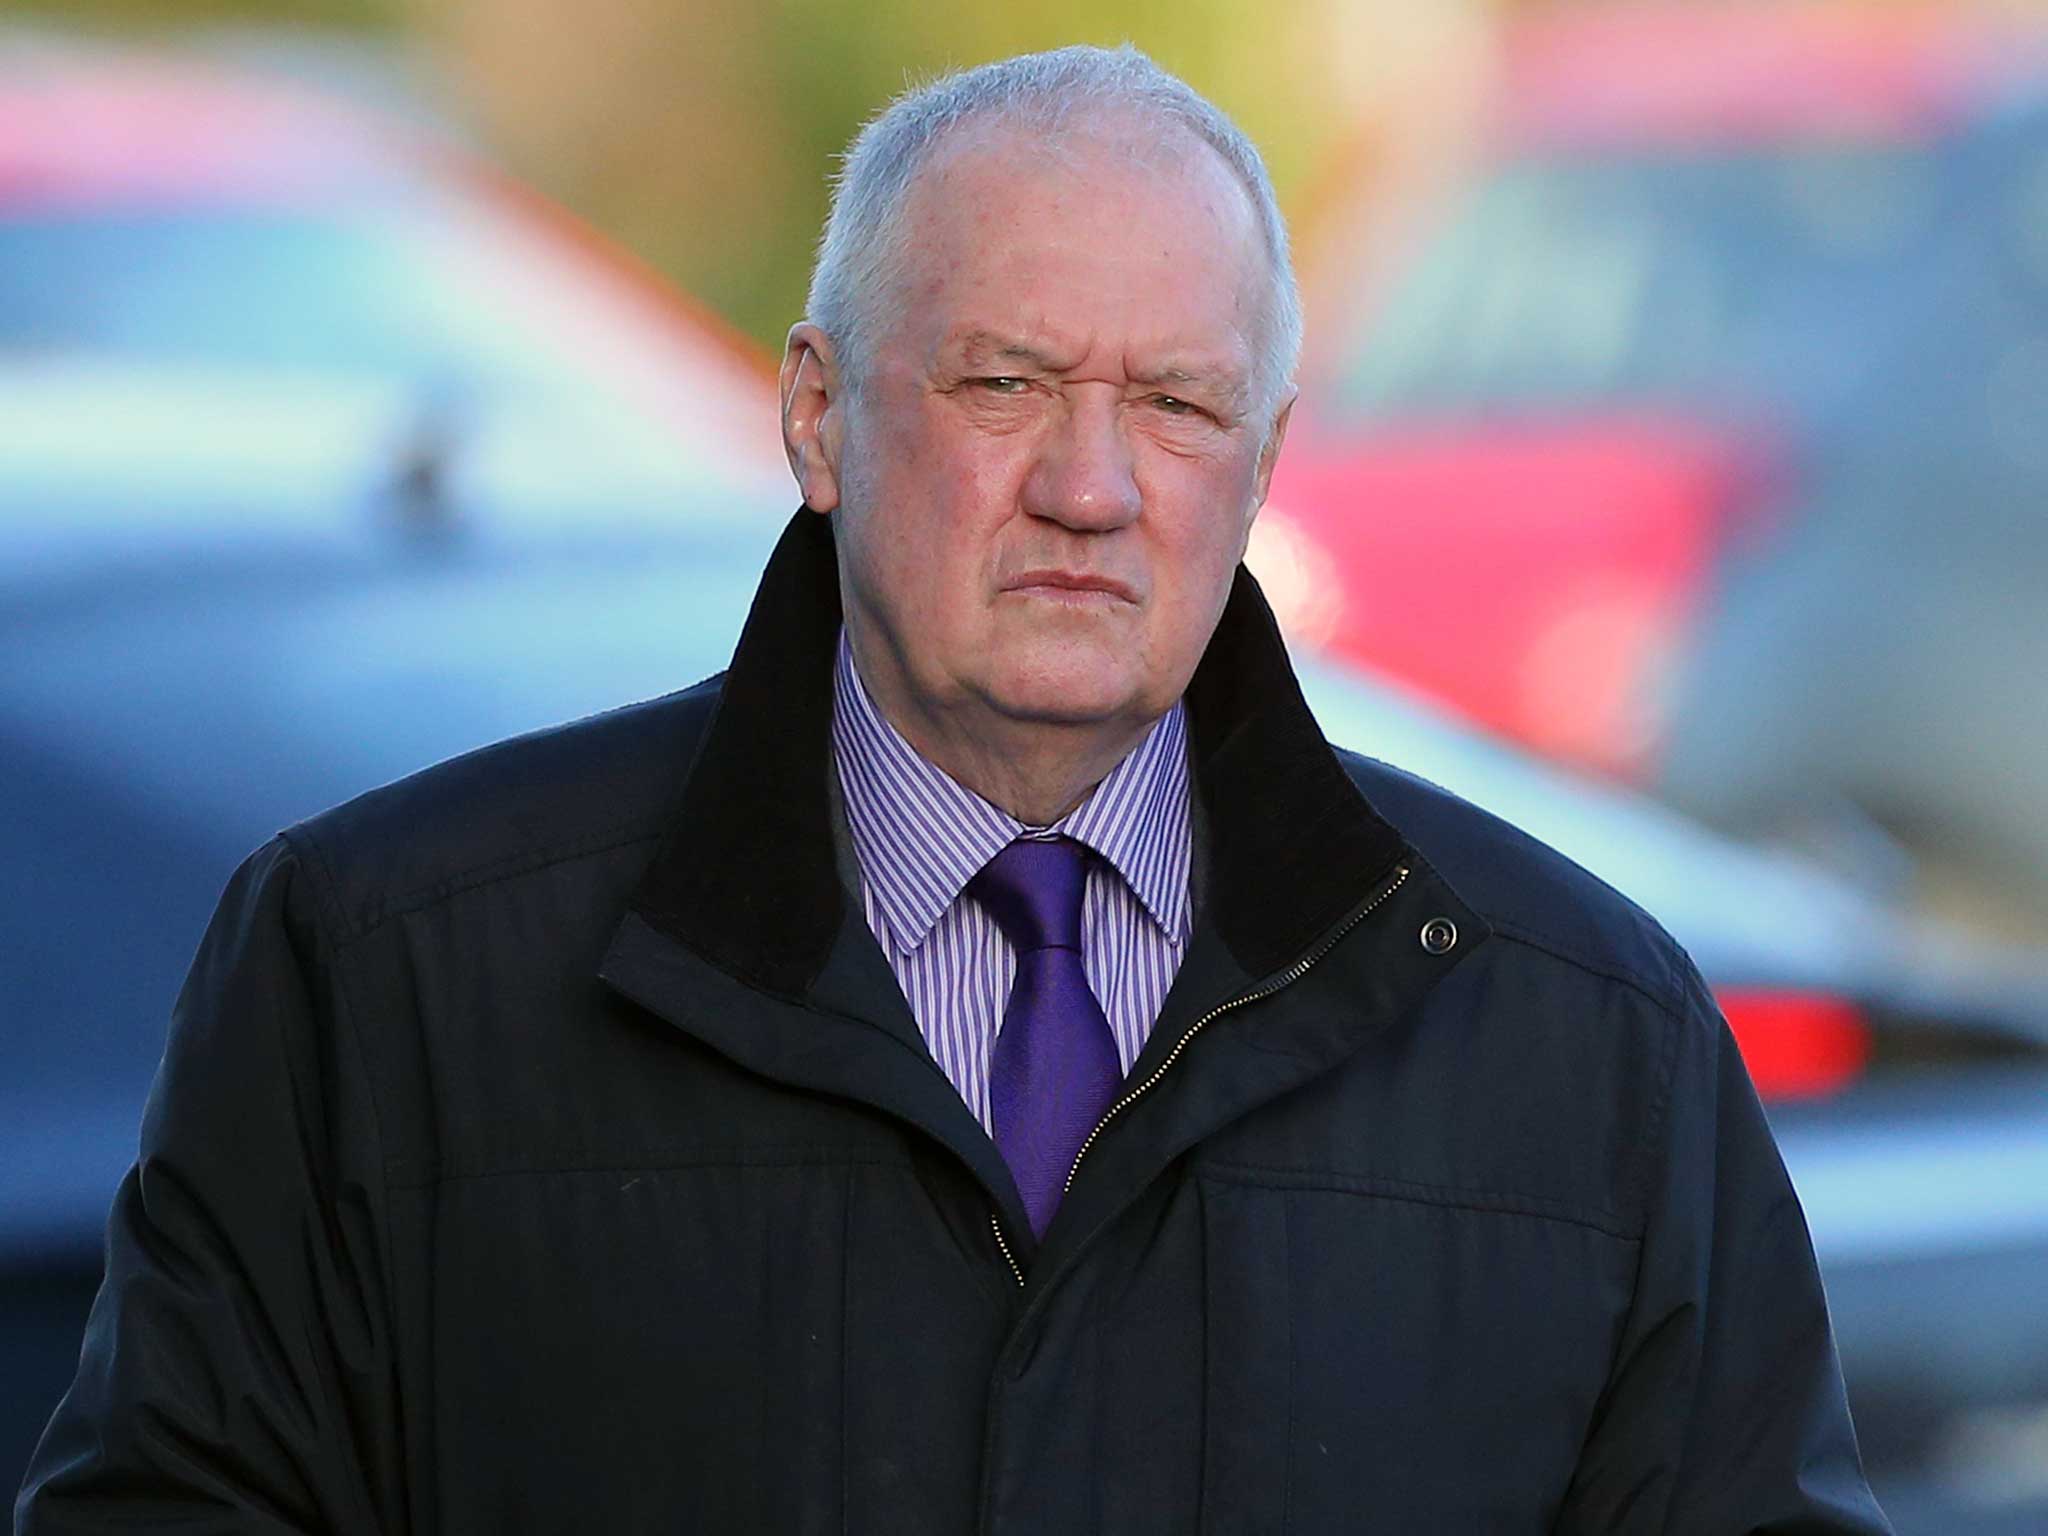 Former South Yorkshire Police Chief David Duckenfield arrives to give evidence at the Hillsborough Inquest at the specially adapted office building in Birchwood Park on 10 March 2015 in Warrington